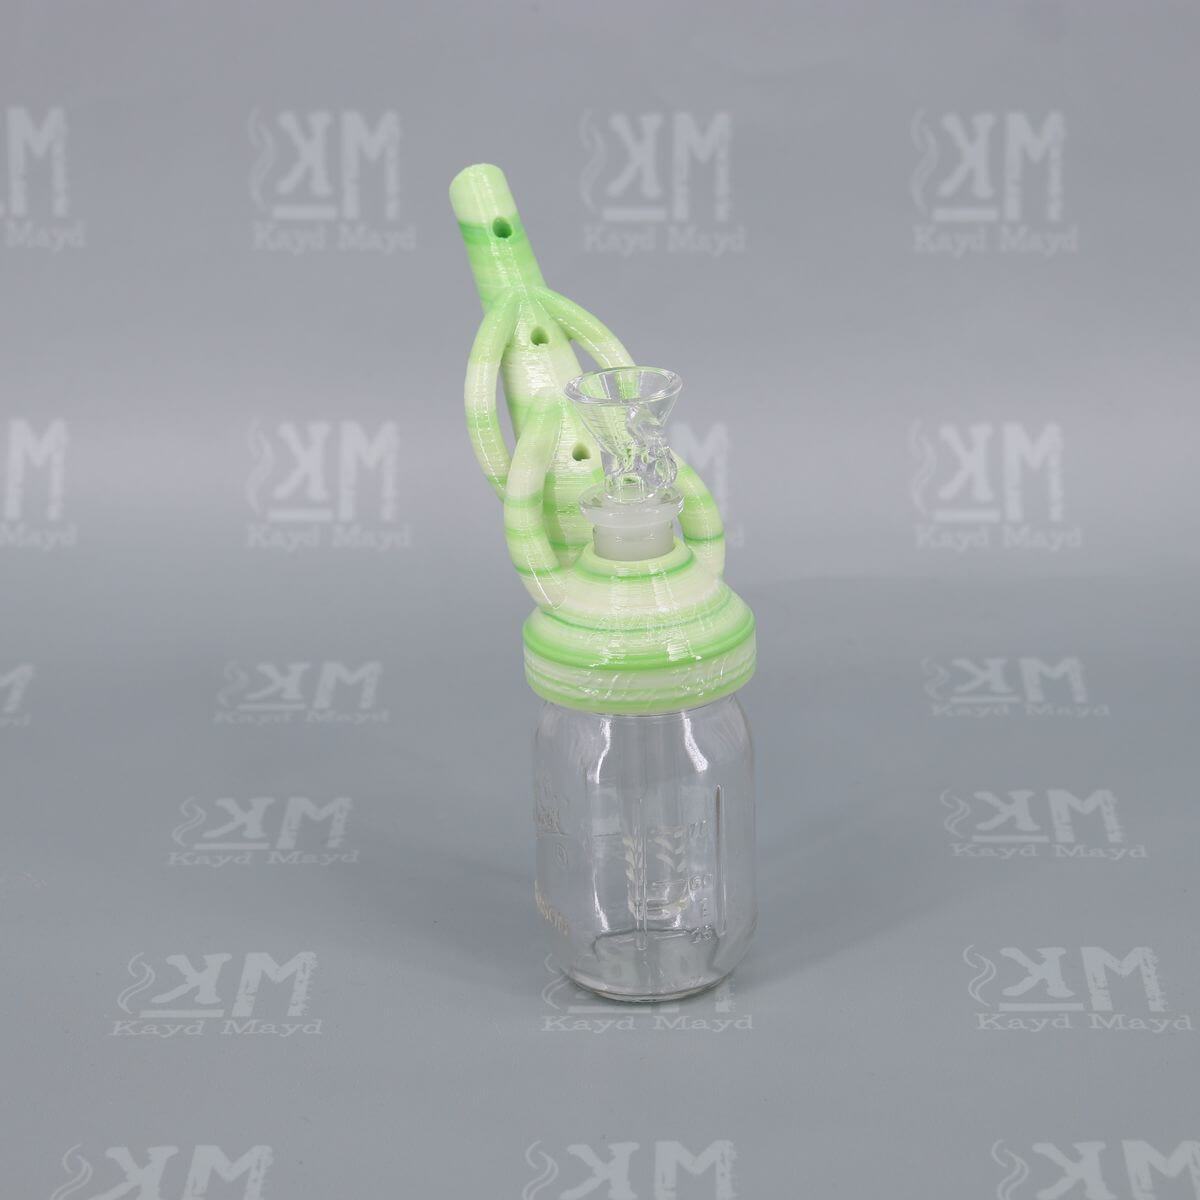 Creme de Lime color of Wee Billy Bubbler No. 2 - Amazing 3D Printed Water Pipe by Kayd Mayd